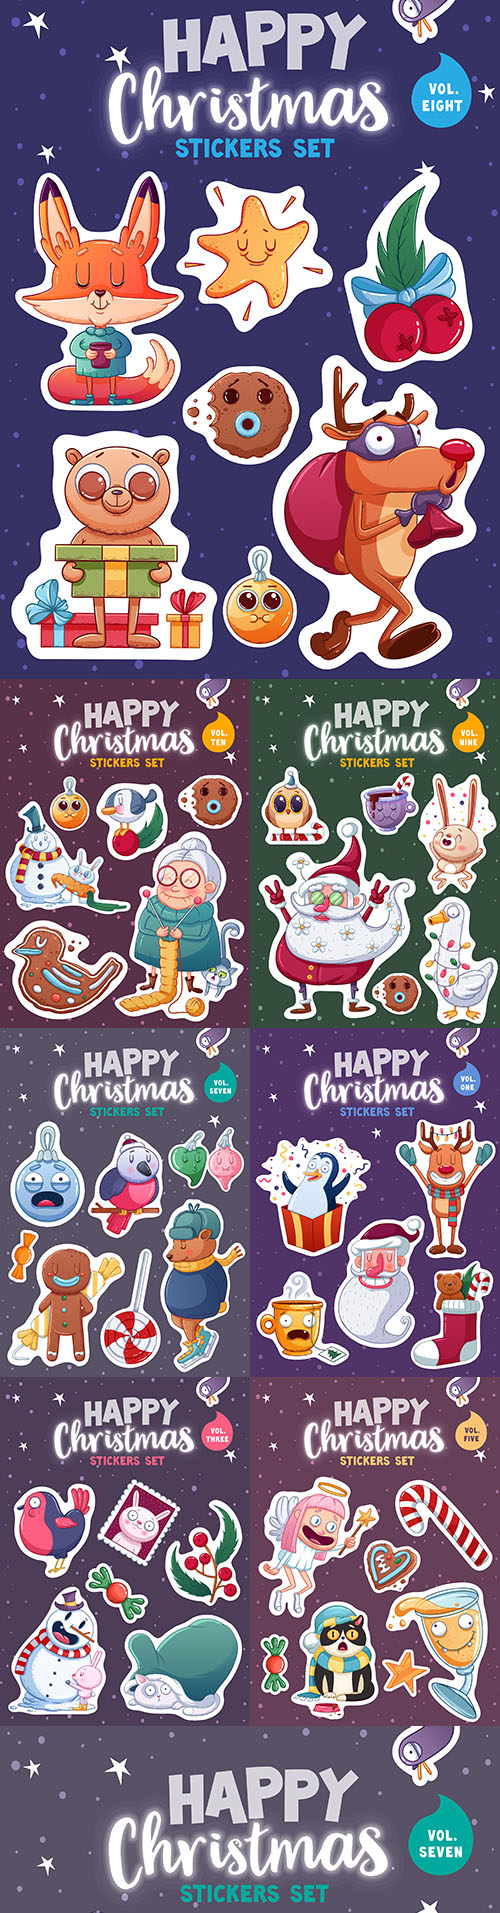 Merry Christmas set stickers or magnets festive souvenirs 2
